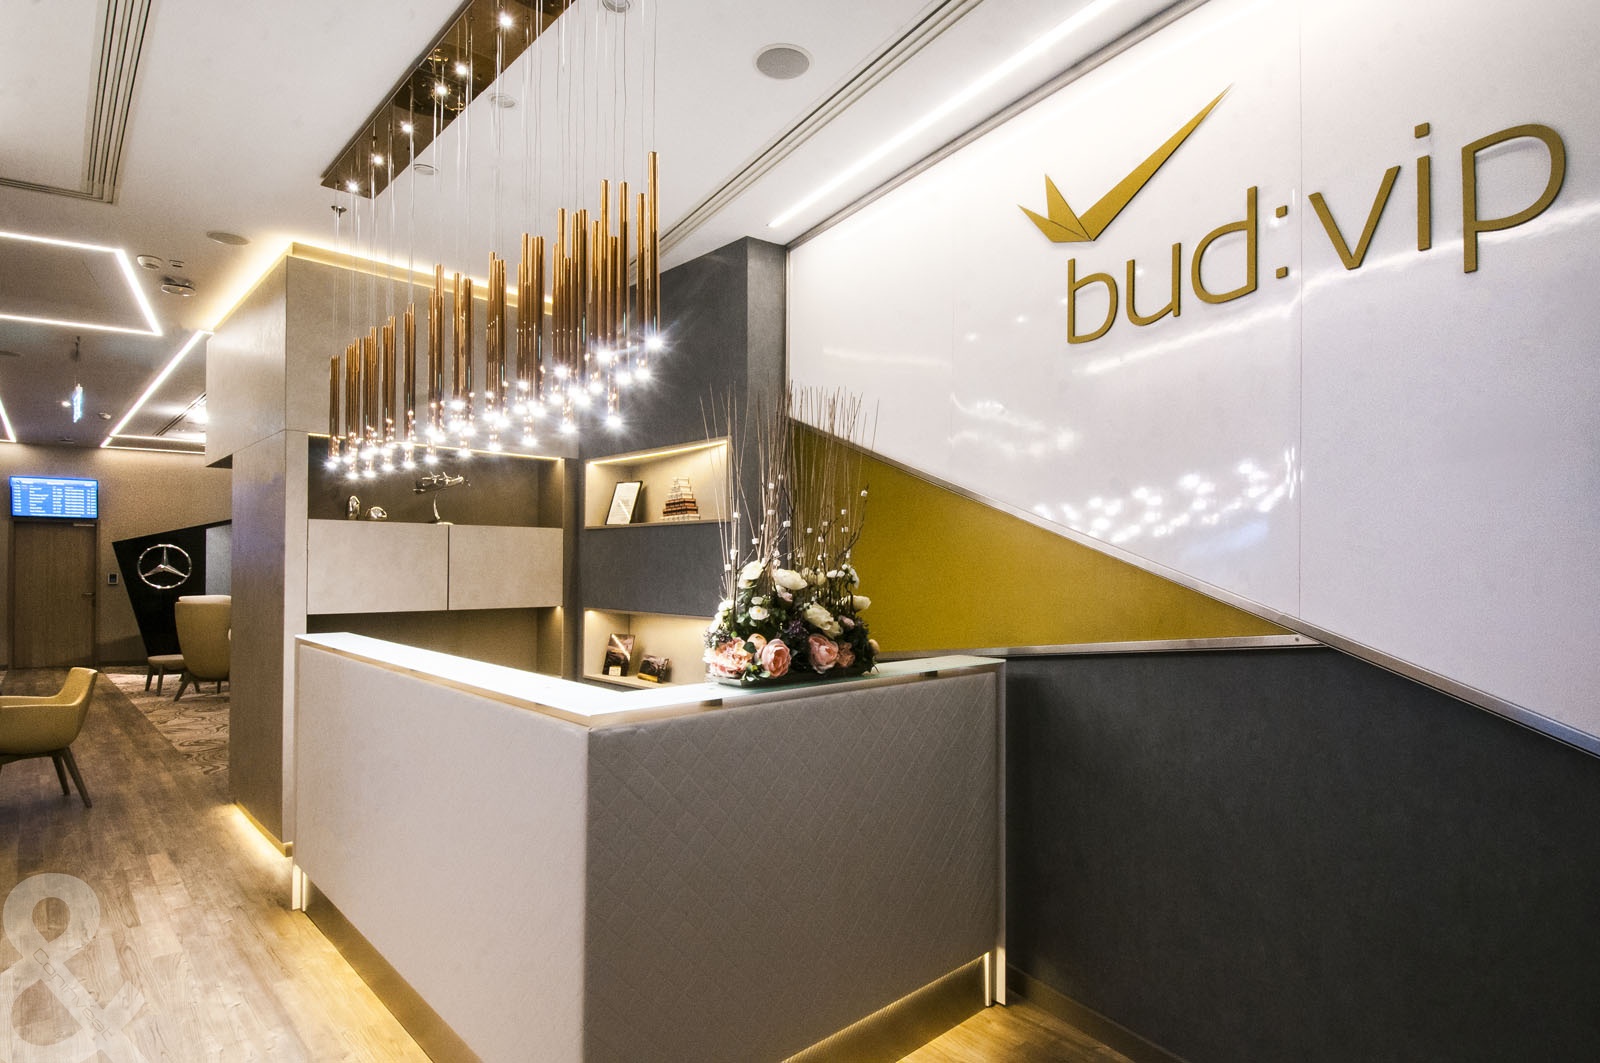 VIP Services @ Budapest Airport - bud:vip